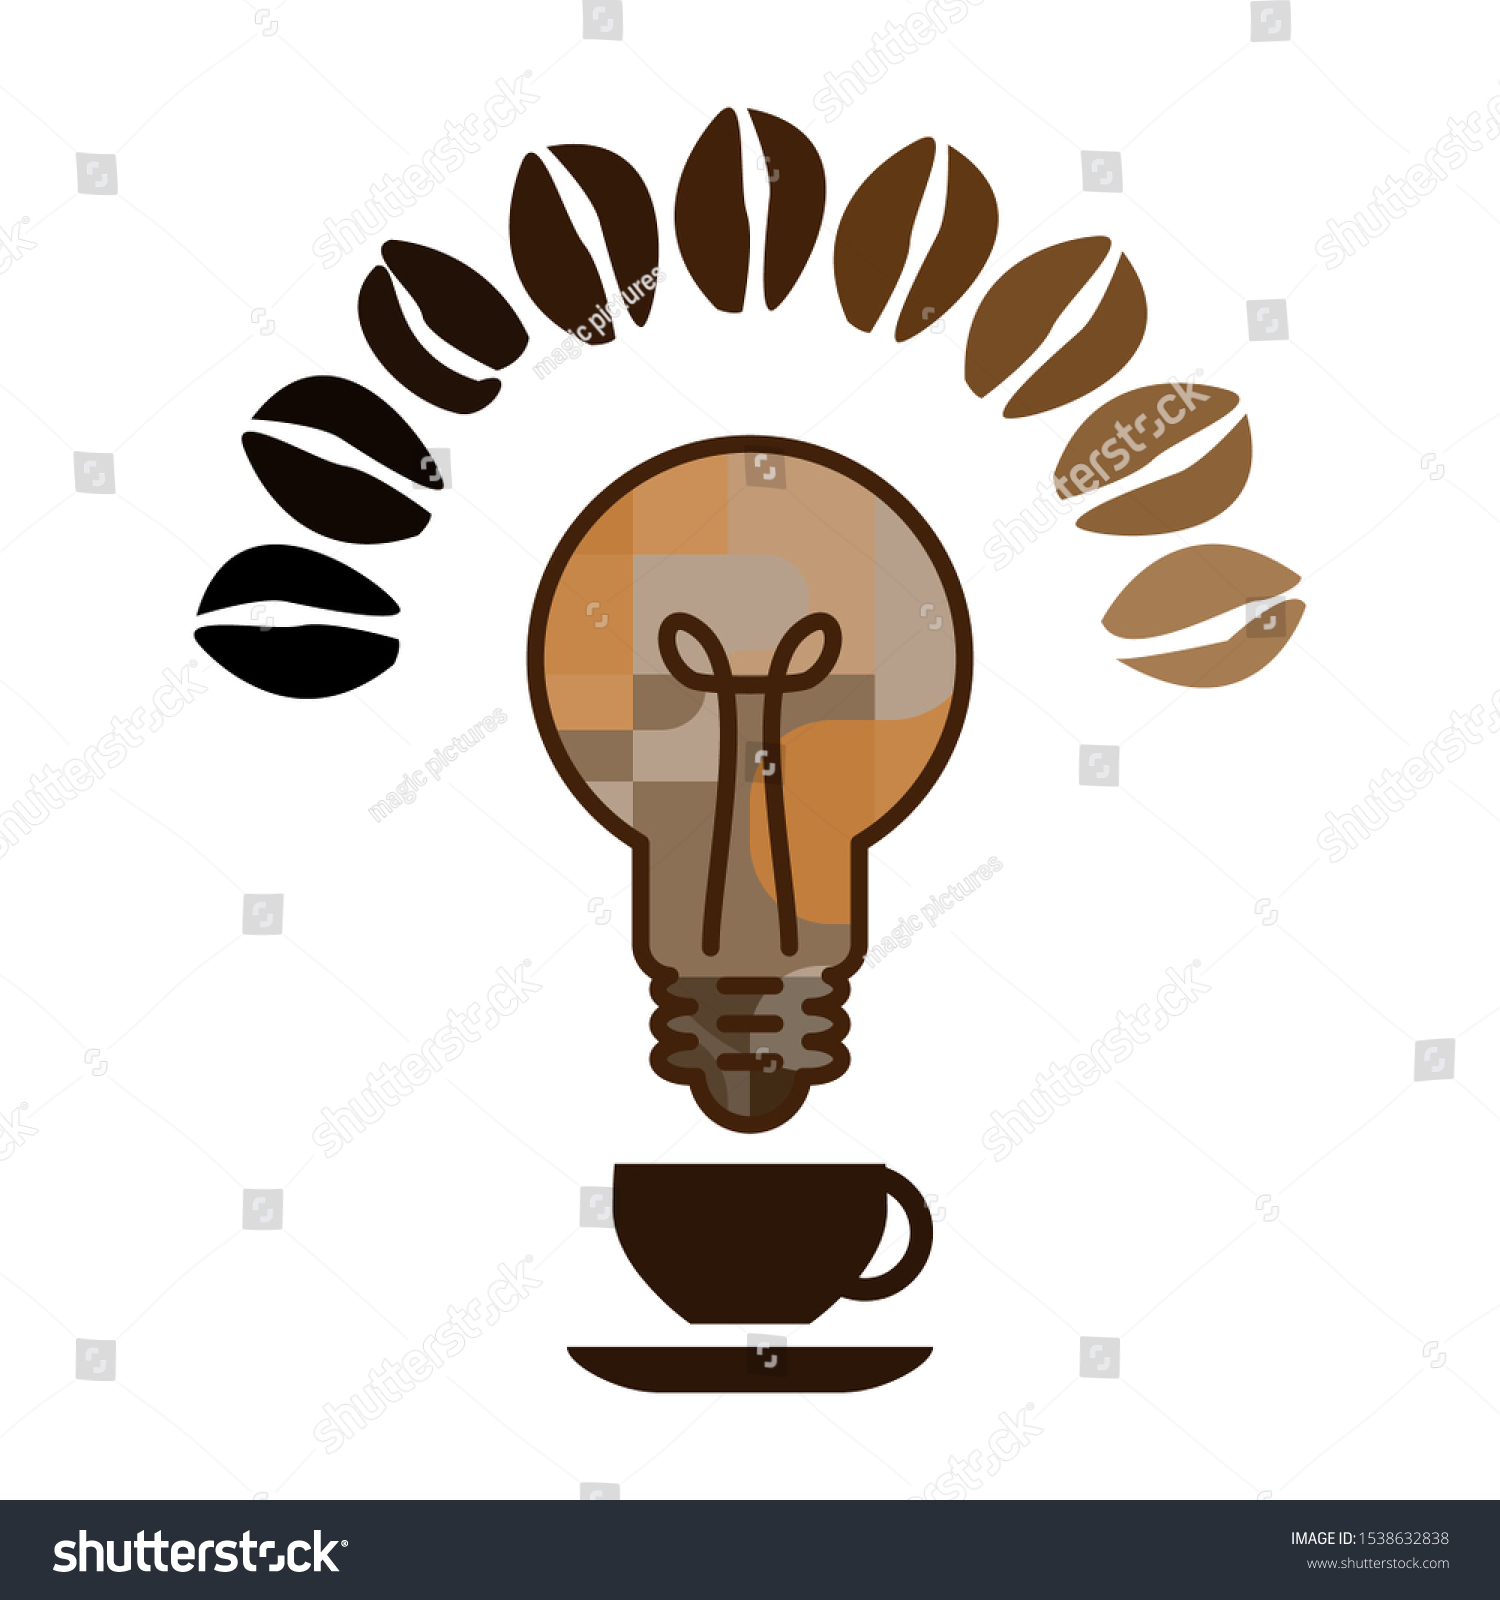 SVG of vector illustration with coffee cup and lightbulb for creative ideas and caffeine connection concept svg